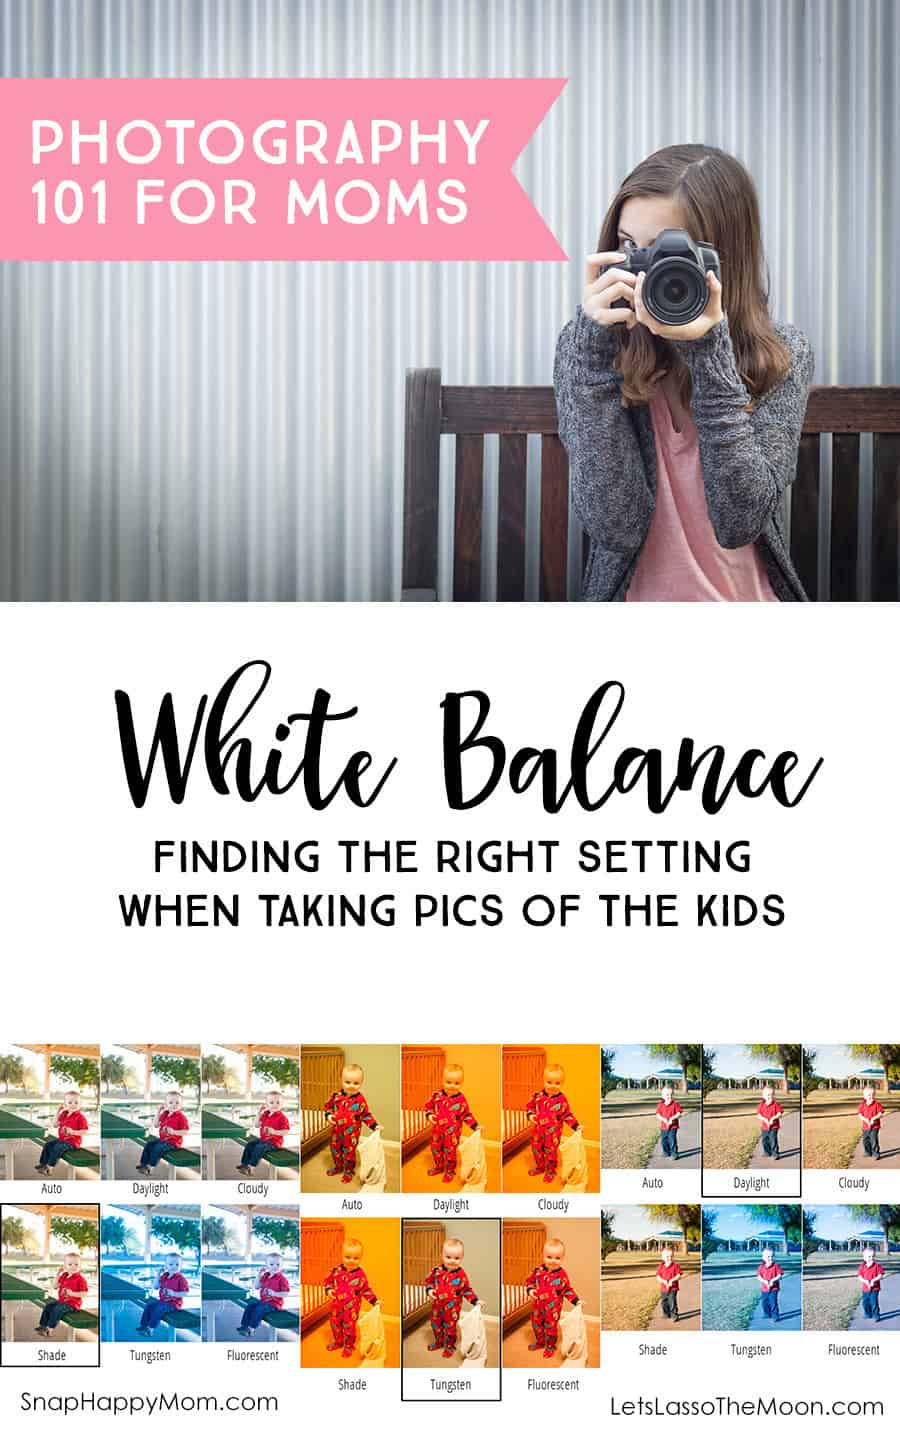 White Balance: Finding the right camera setting when taking pictures of the kids *Great visual photography examples of how to pick the right setting.